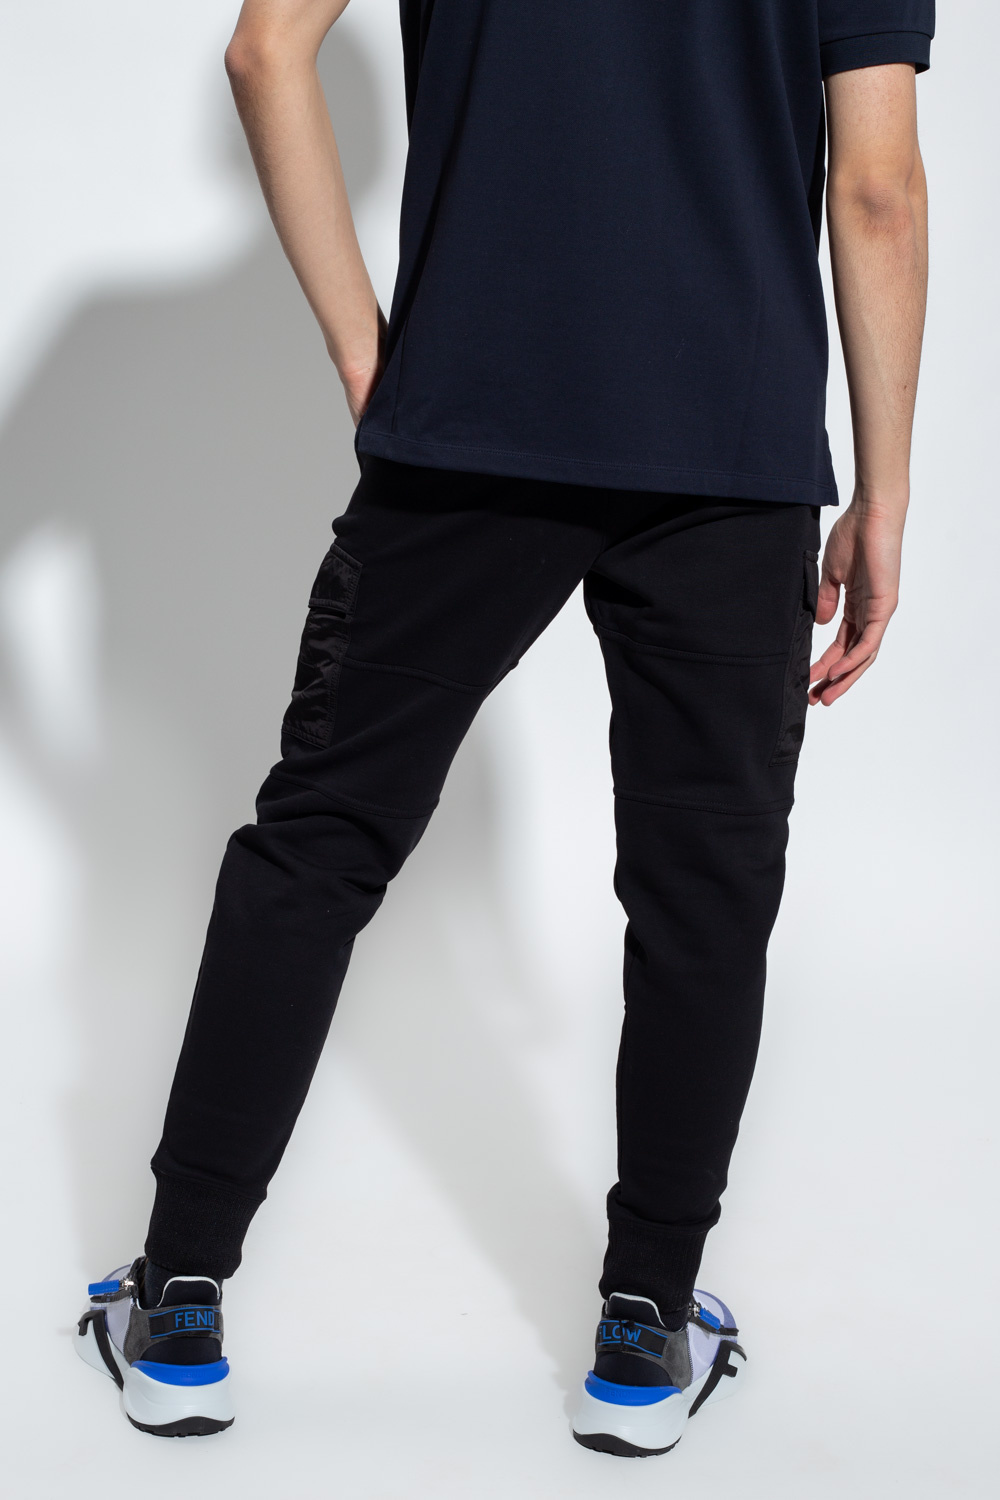 PS Paul Smith Cargo Skinny trousers